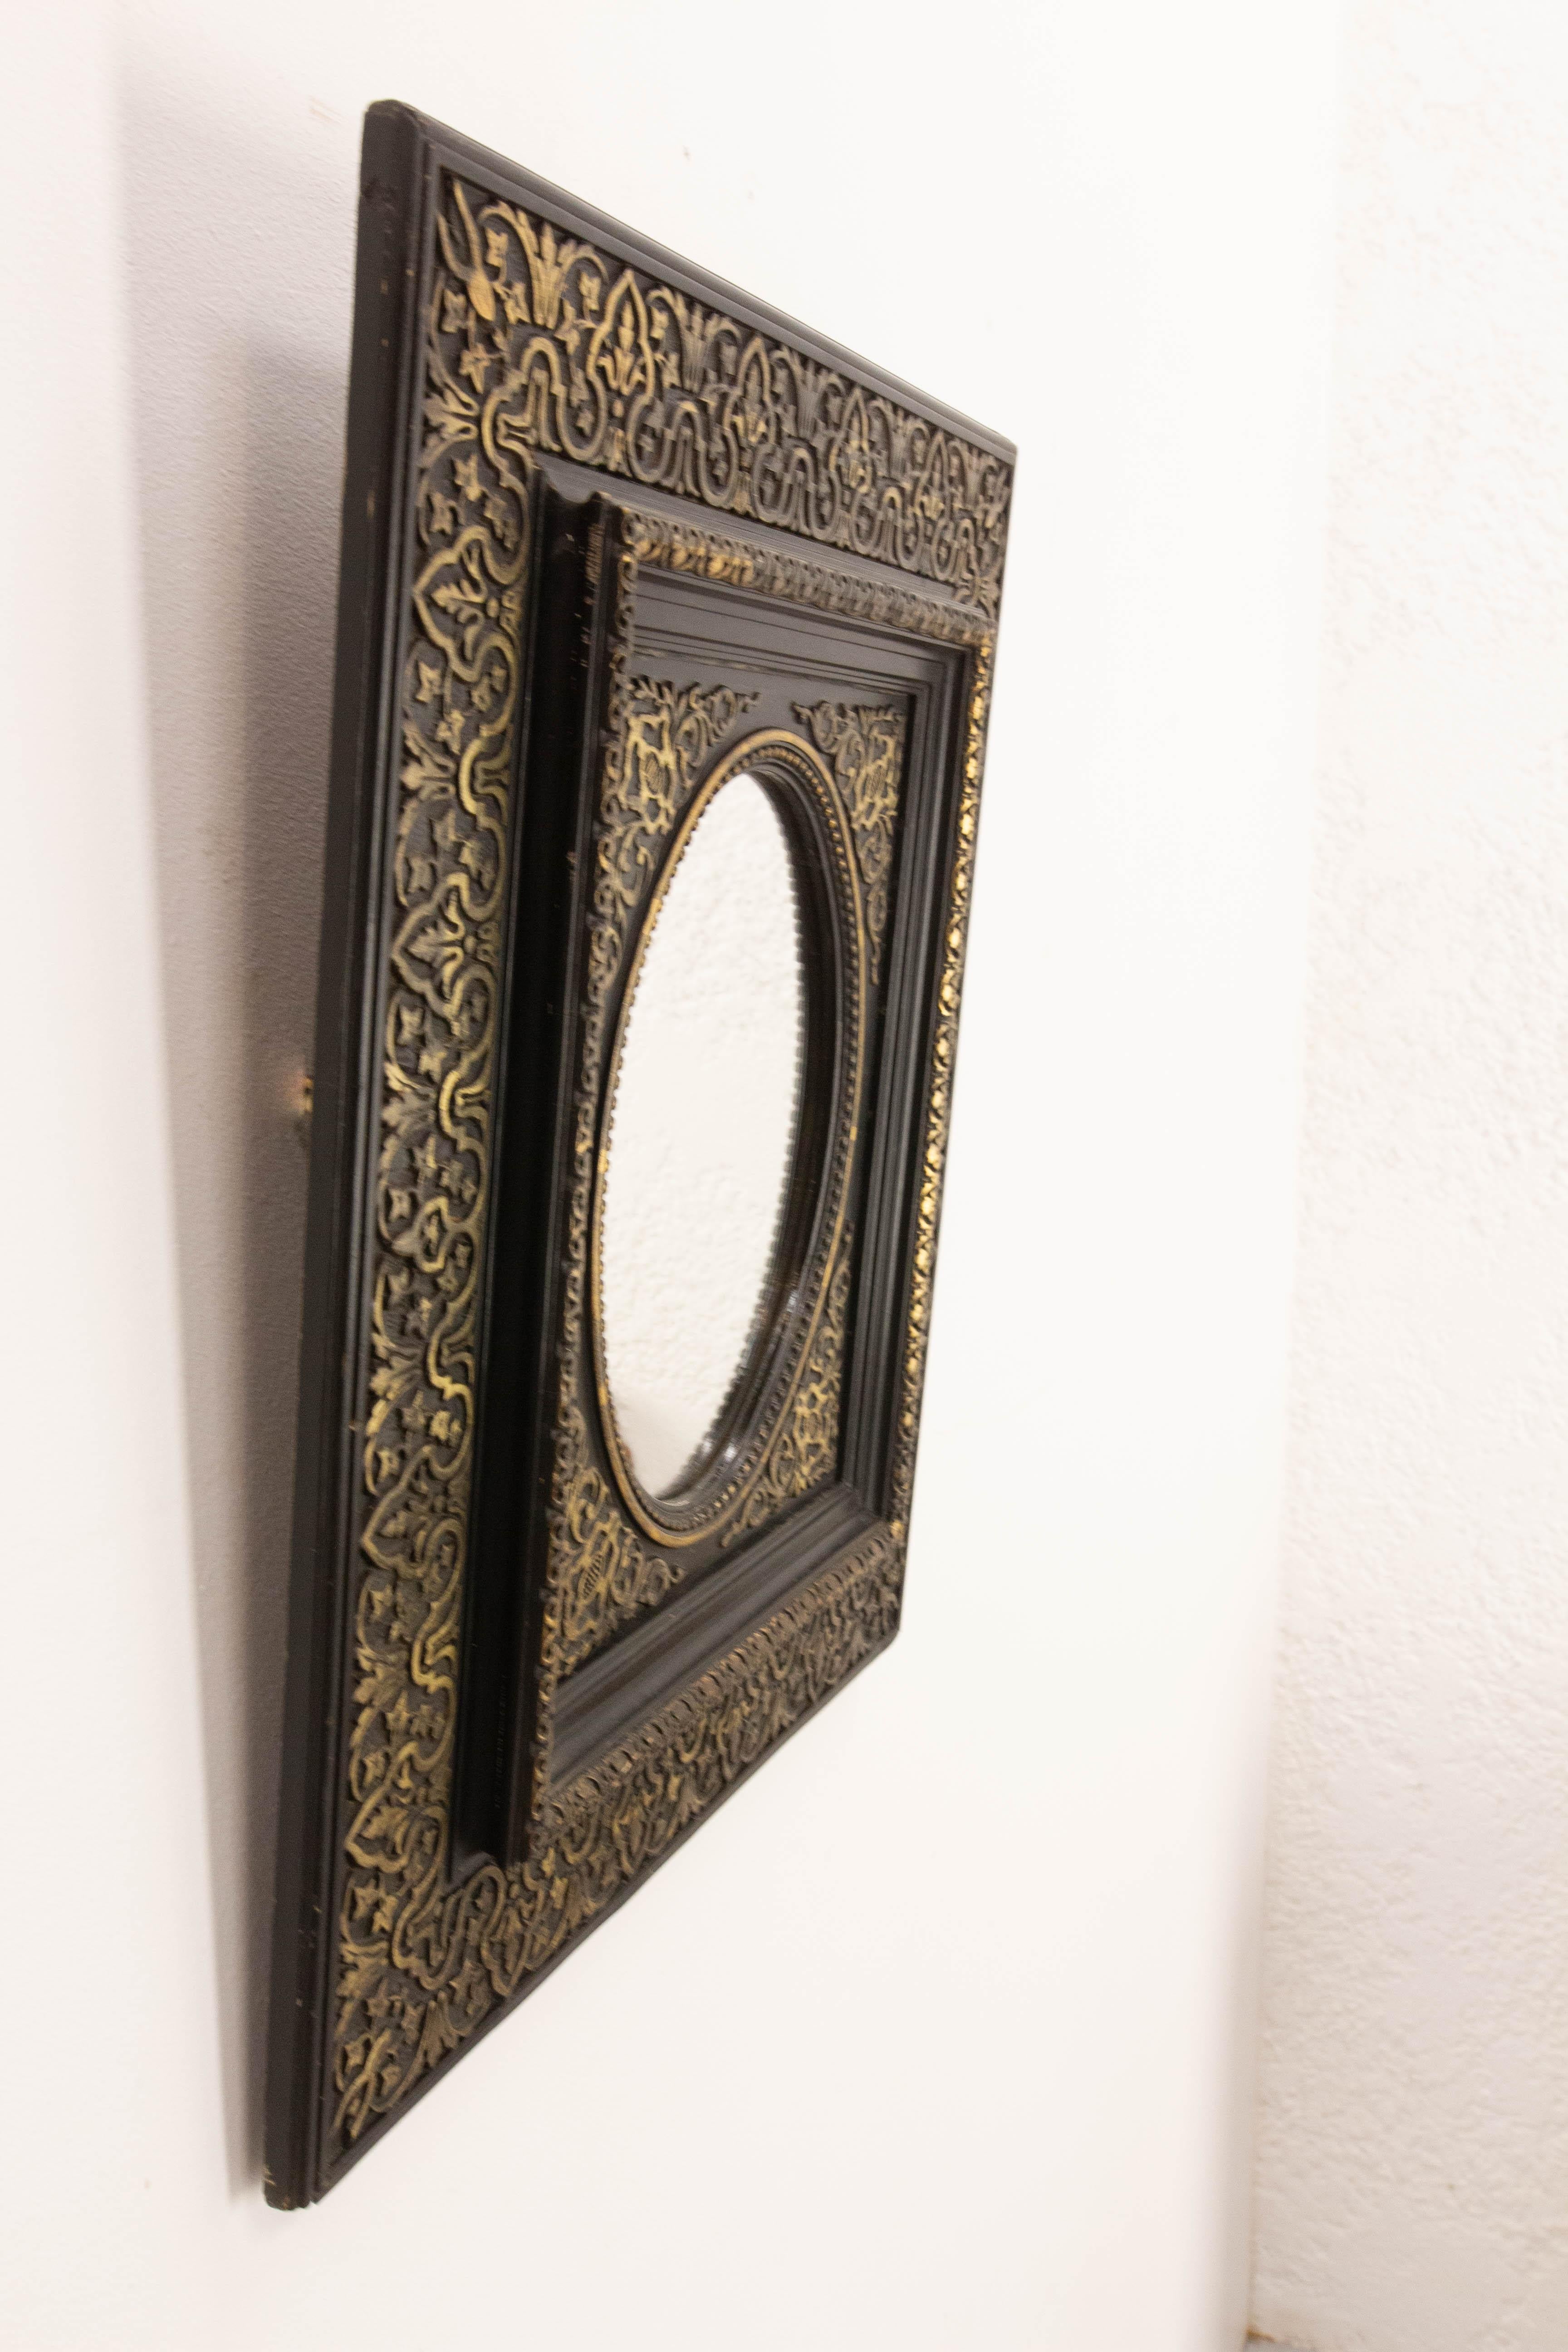 Napoléon III wood and stucco wall mirror painted of black and gold.
During the Napoleon III period, artists had a keen interest in everything to do with Eastern art. This explains the motifs on this mirror, created to invite travel.
The black and